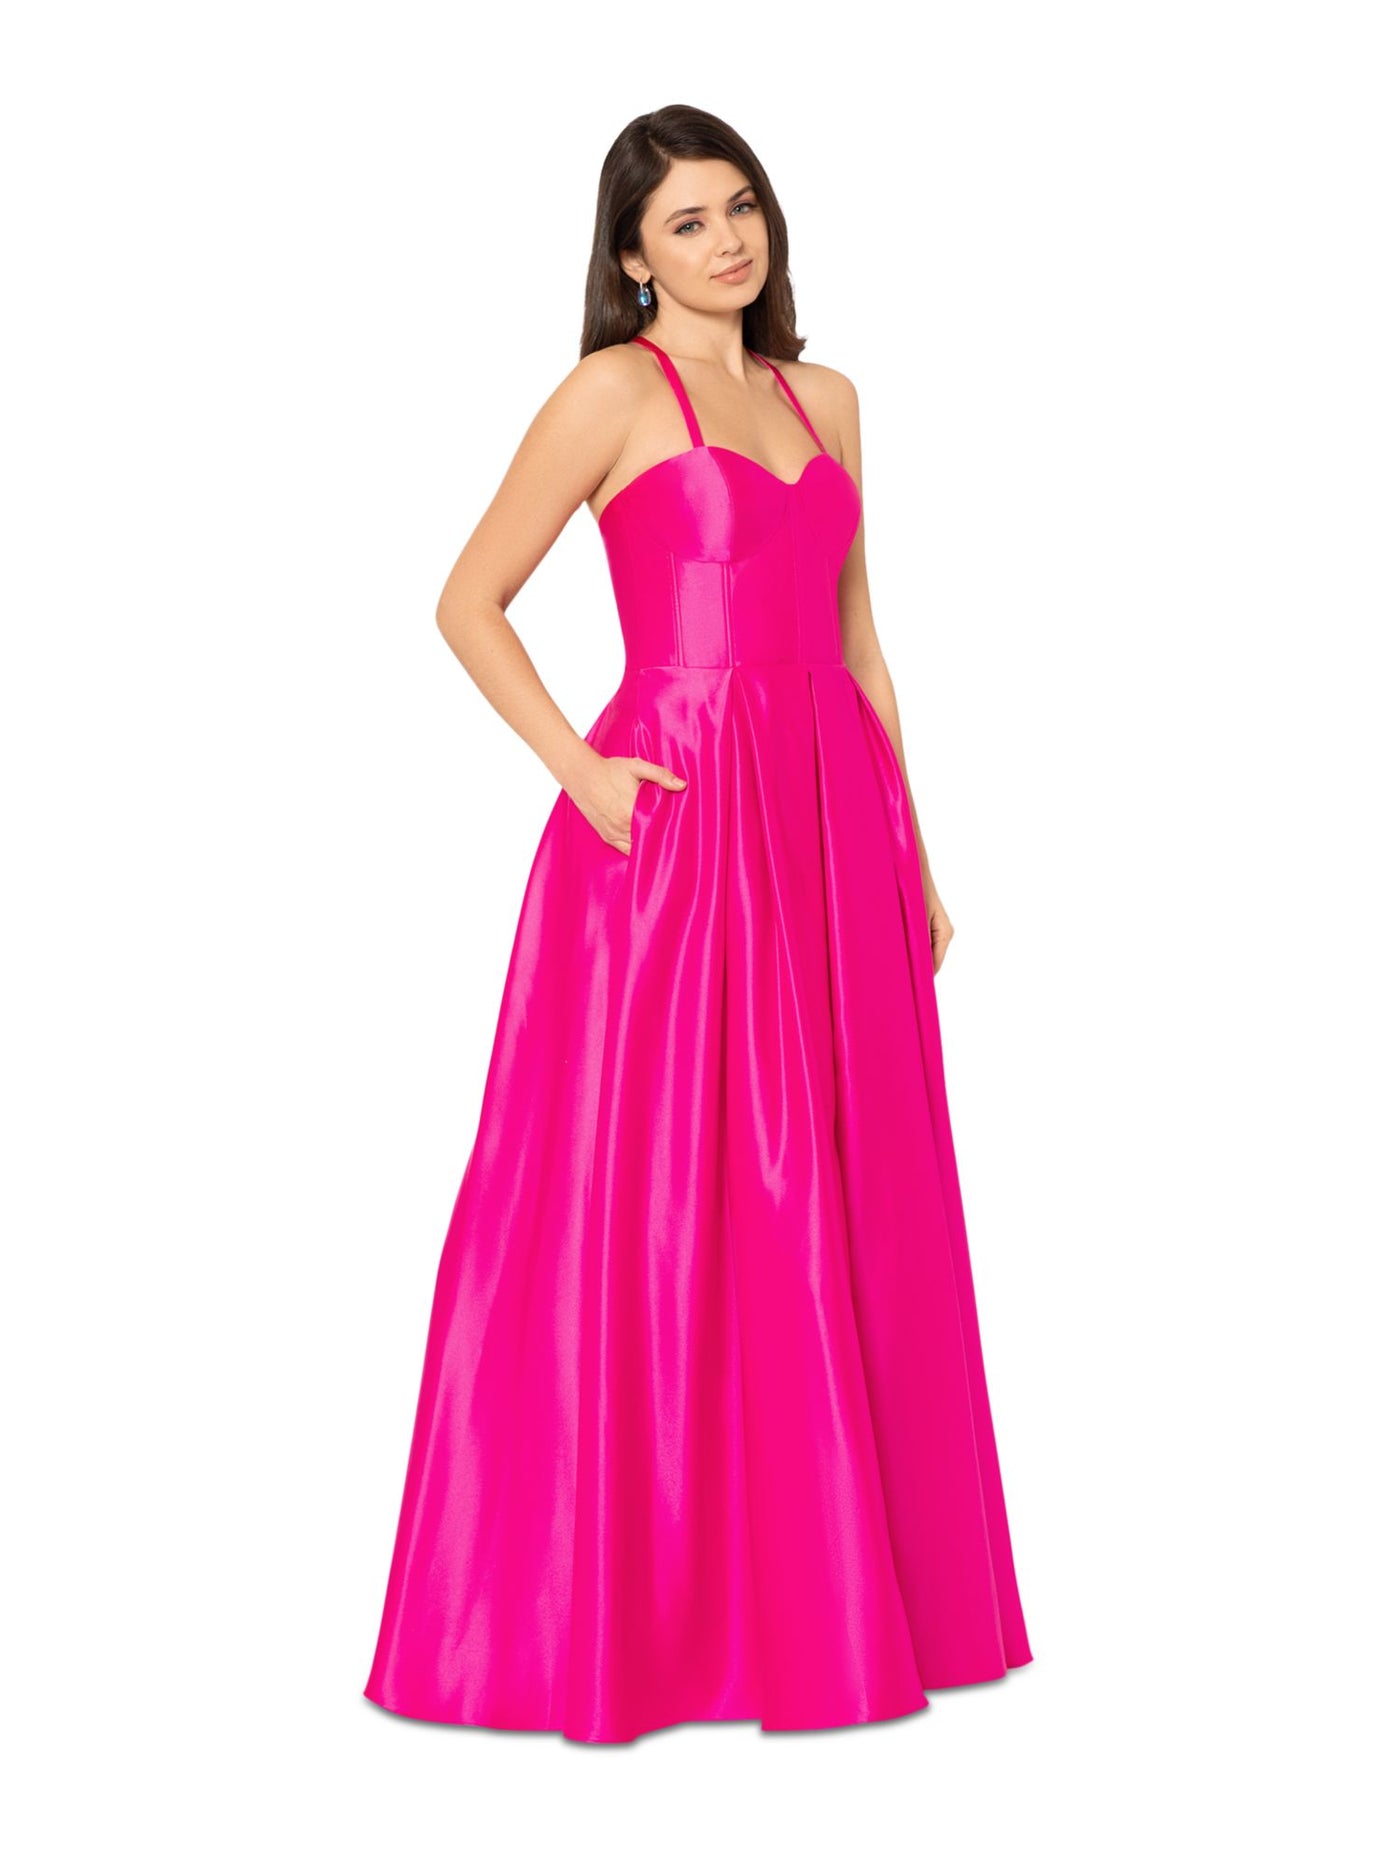 BLONDIE NITES Womens Pink Zippered Pocketed Lace-up Corset Bodice Lined Sleeveless Sweetheart Neckline Full-Length Formal Gown Dress Juniors 7